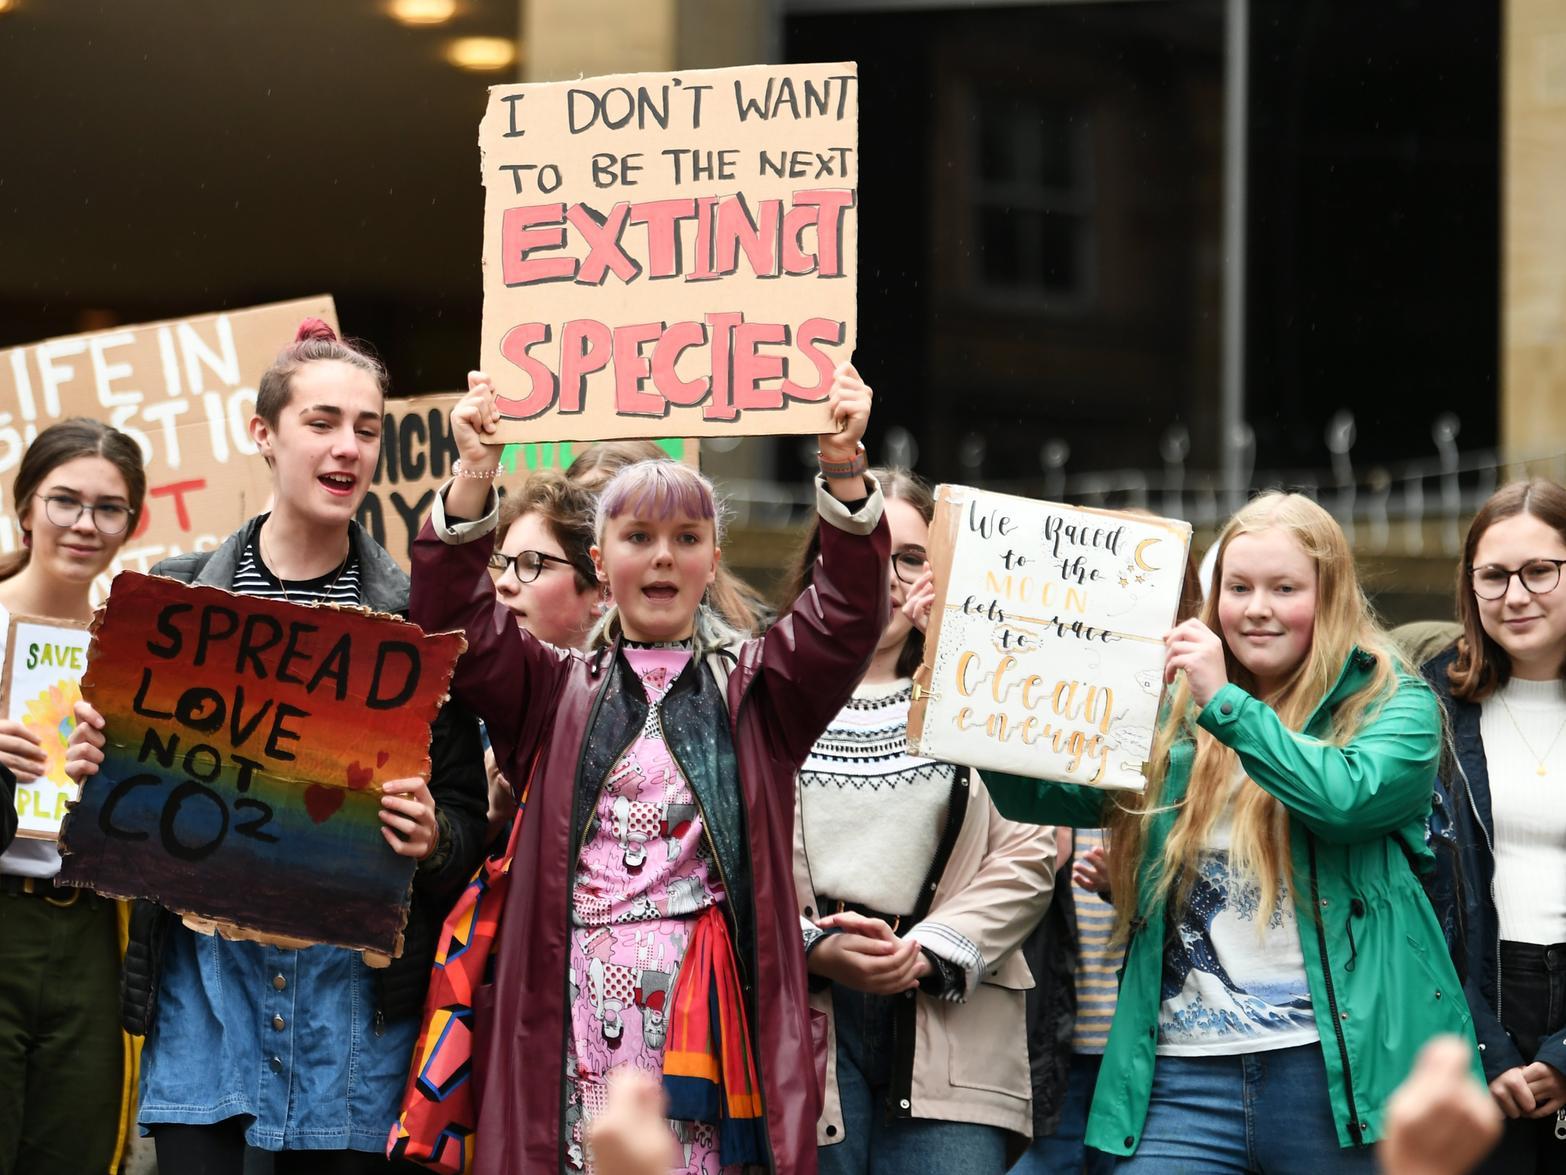 Thousands of young people from across Edinburgh have taken part in school strikes over climate change, insisting there is no plan B for their generation.